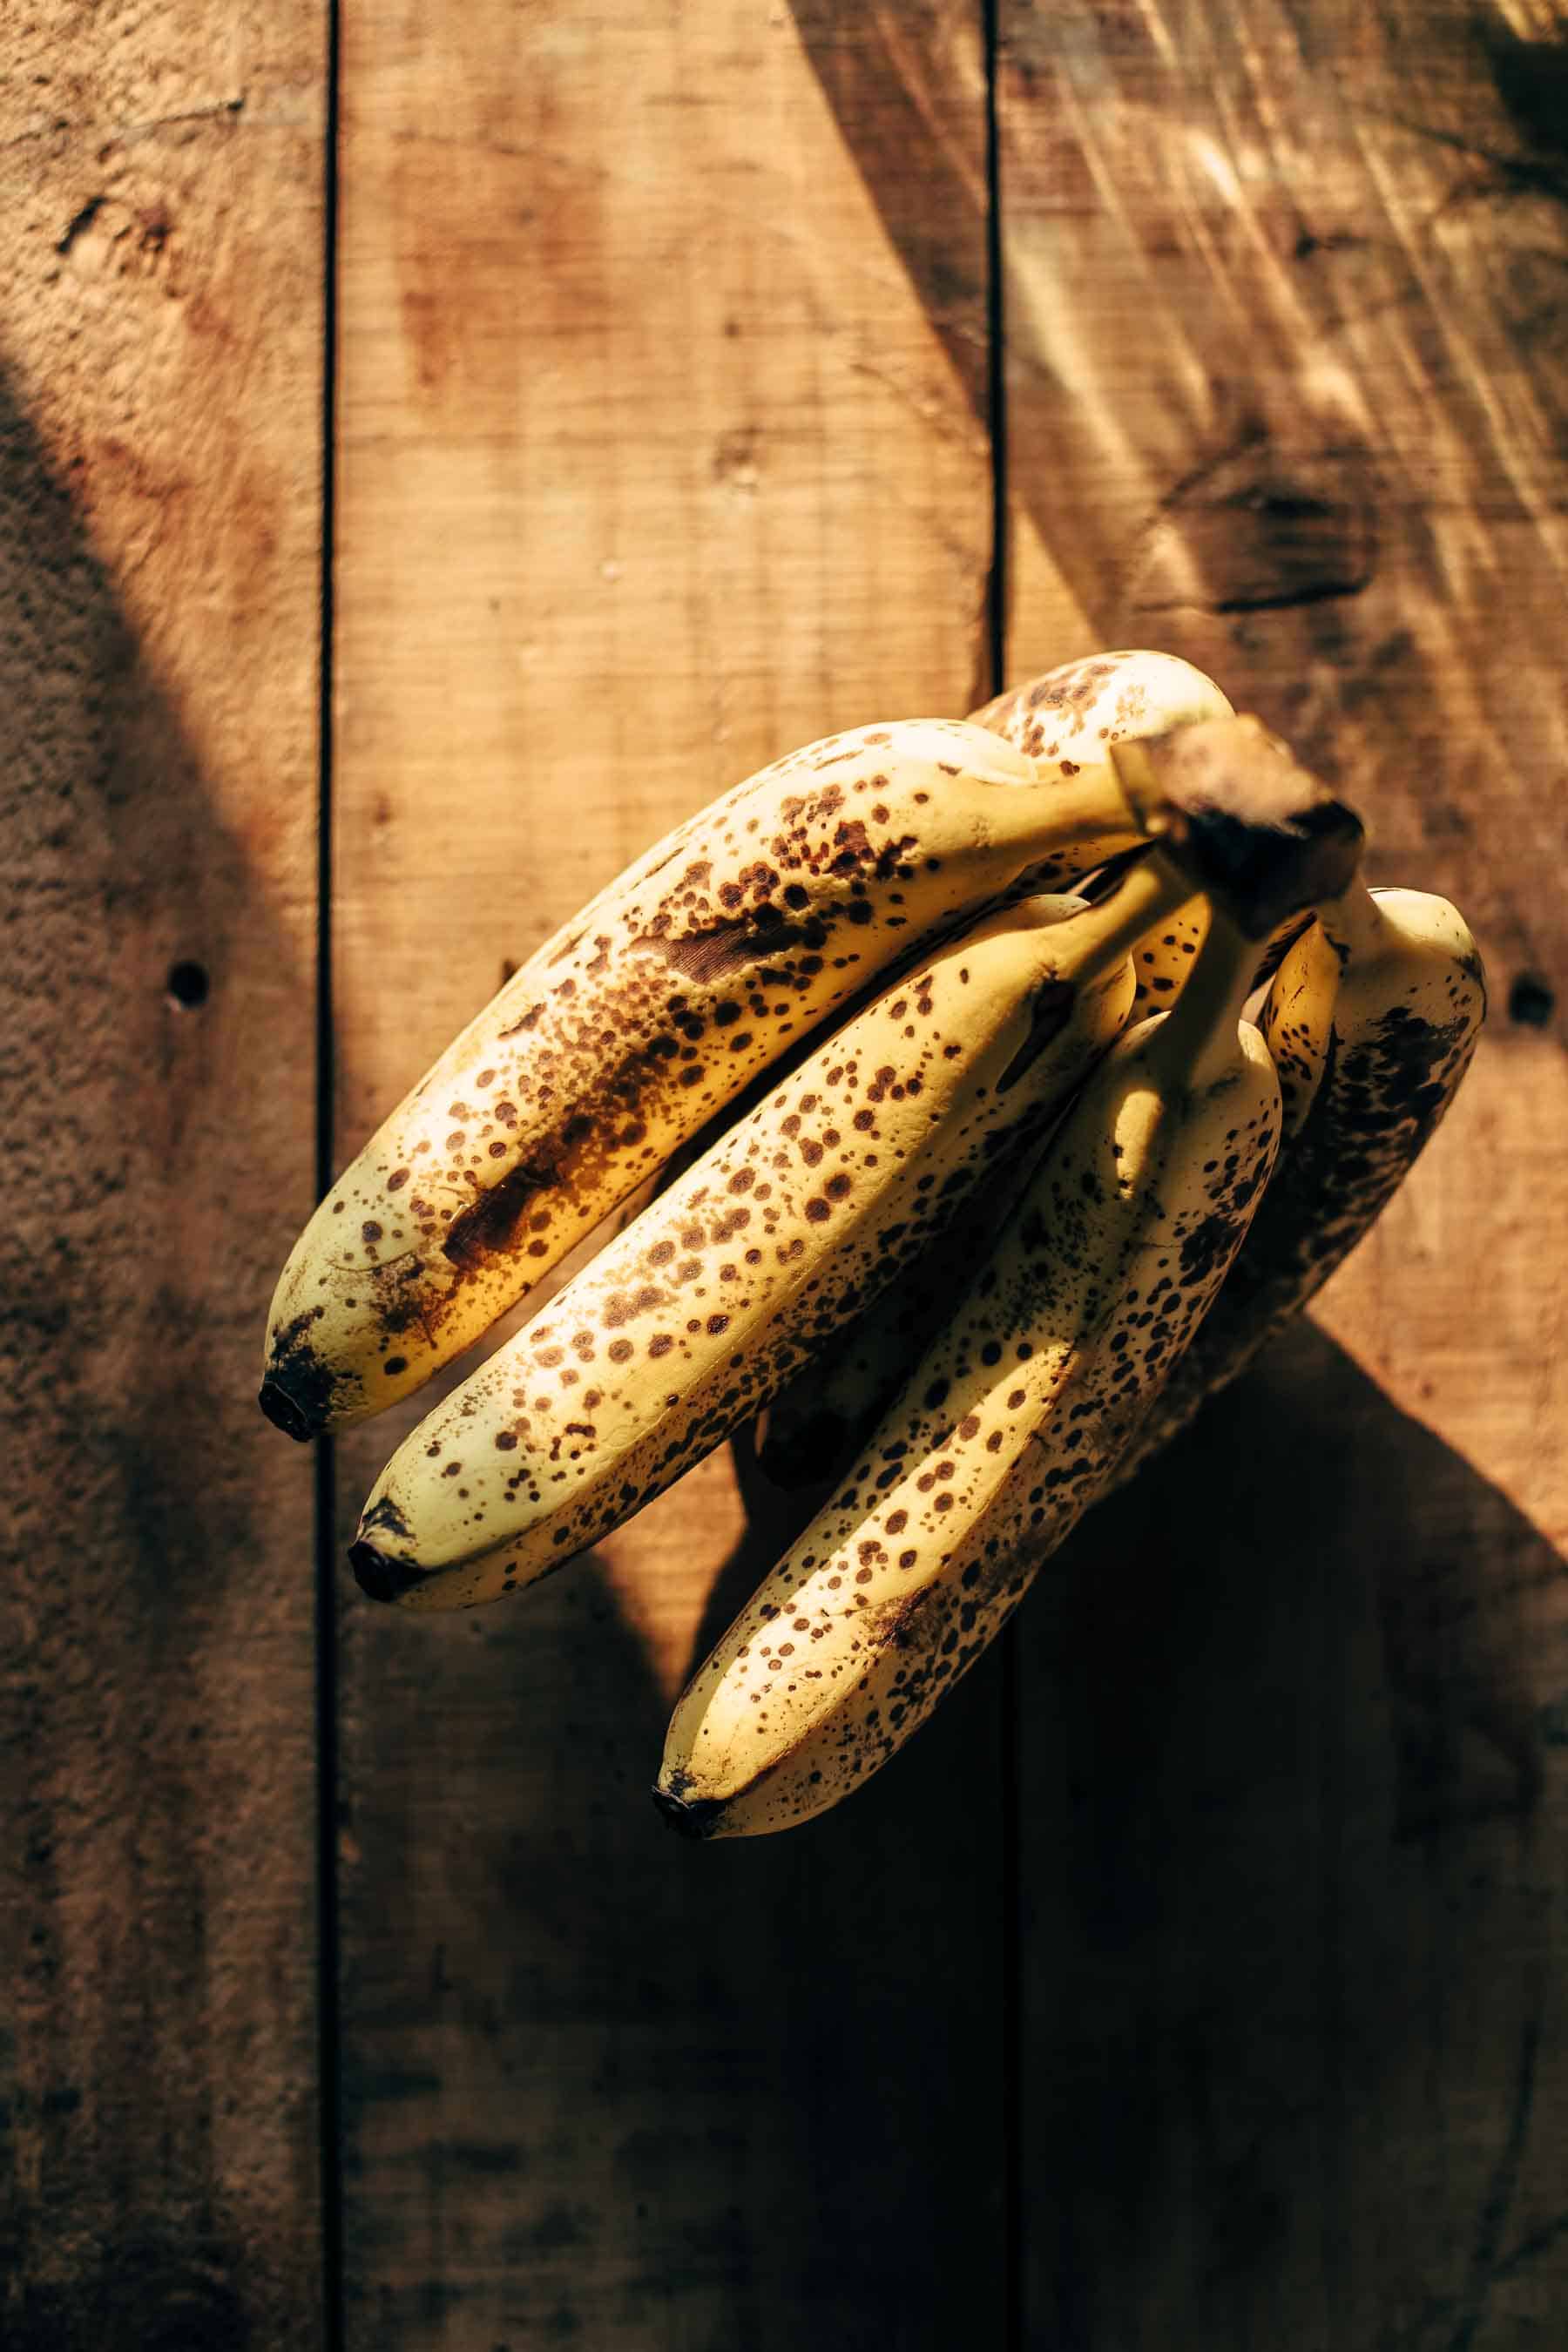 ripe bananas with lots of brown spots on a wooden table